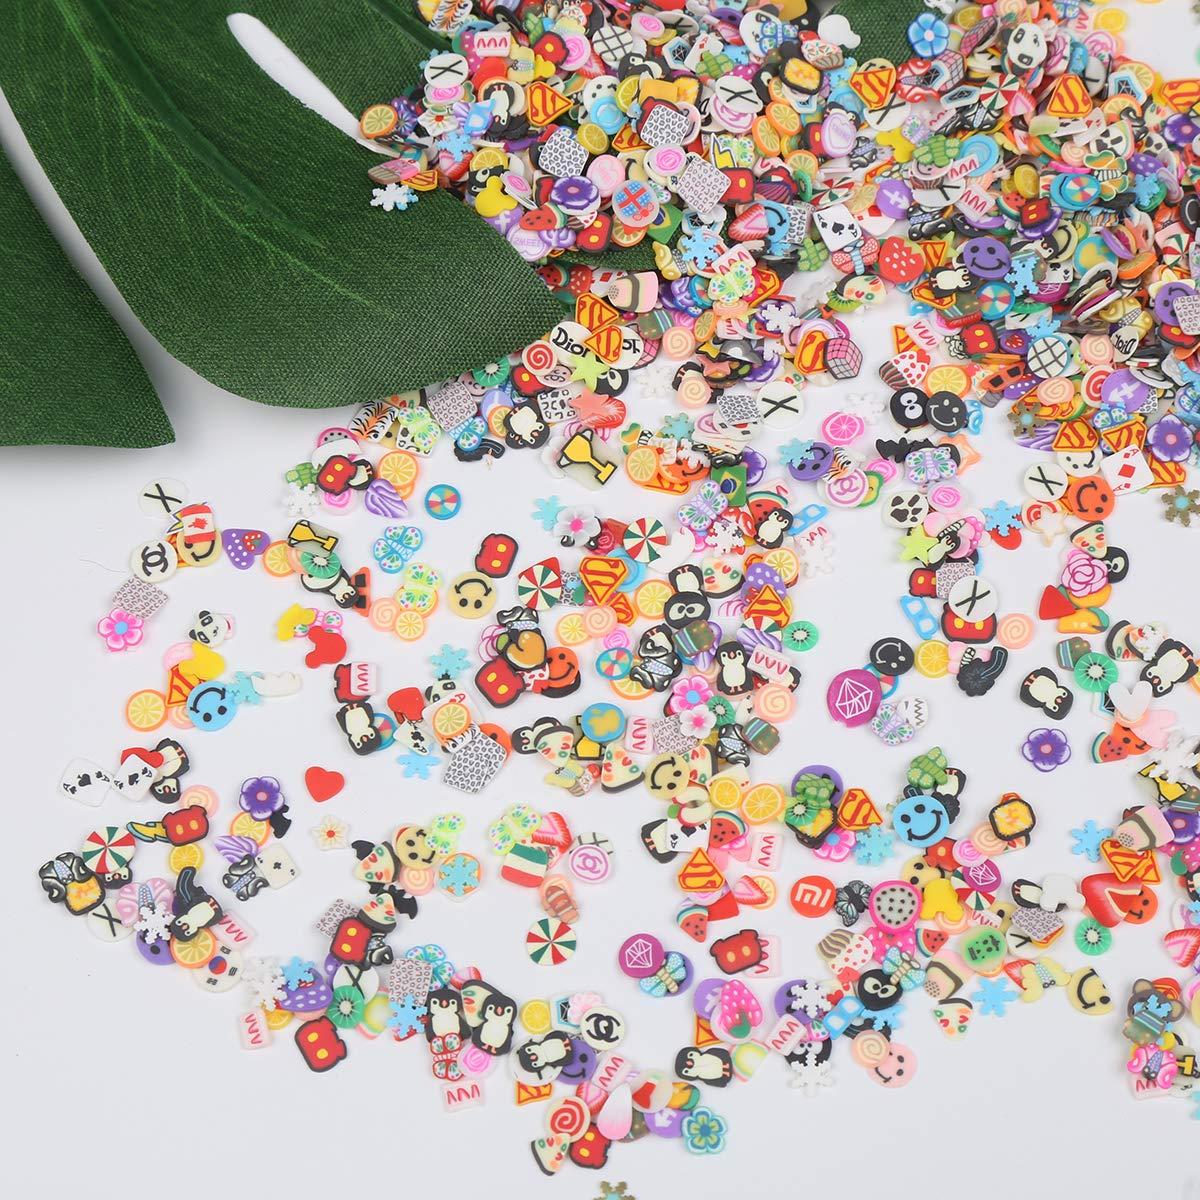 HOCIBES 5000PCS Polymer Clay Slices ,Cute Fimo Slices ,3D Polymer Clay Nail  Art Decoration Slices , Flower Slices for Nail Art ,Slime Add Ins